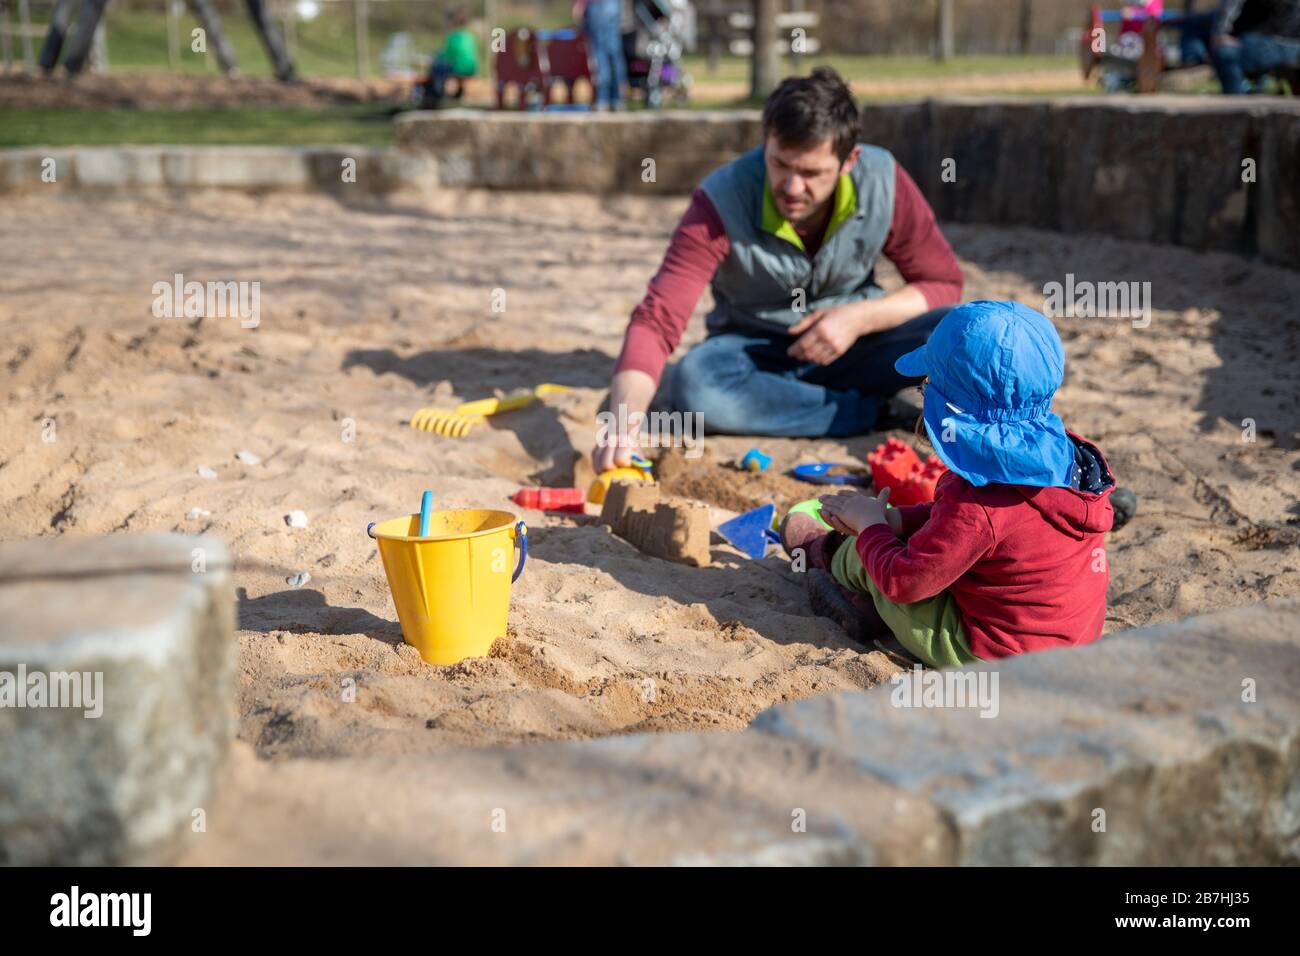 Nuremberg Germany 16th Mar A Man And A Child Play In A Sandbox On A